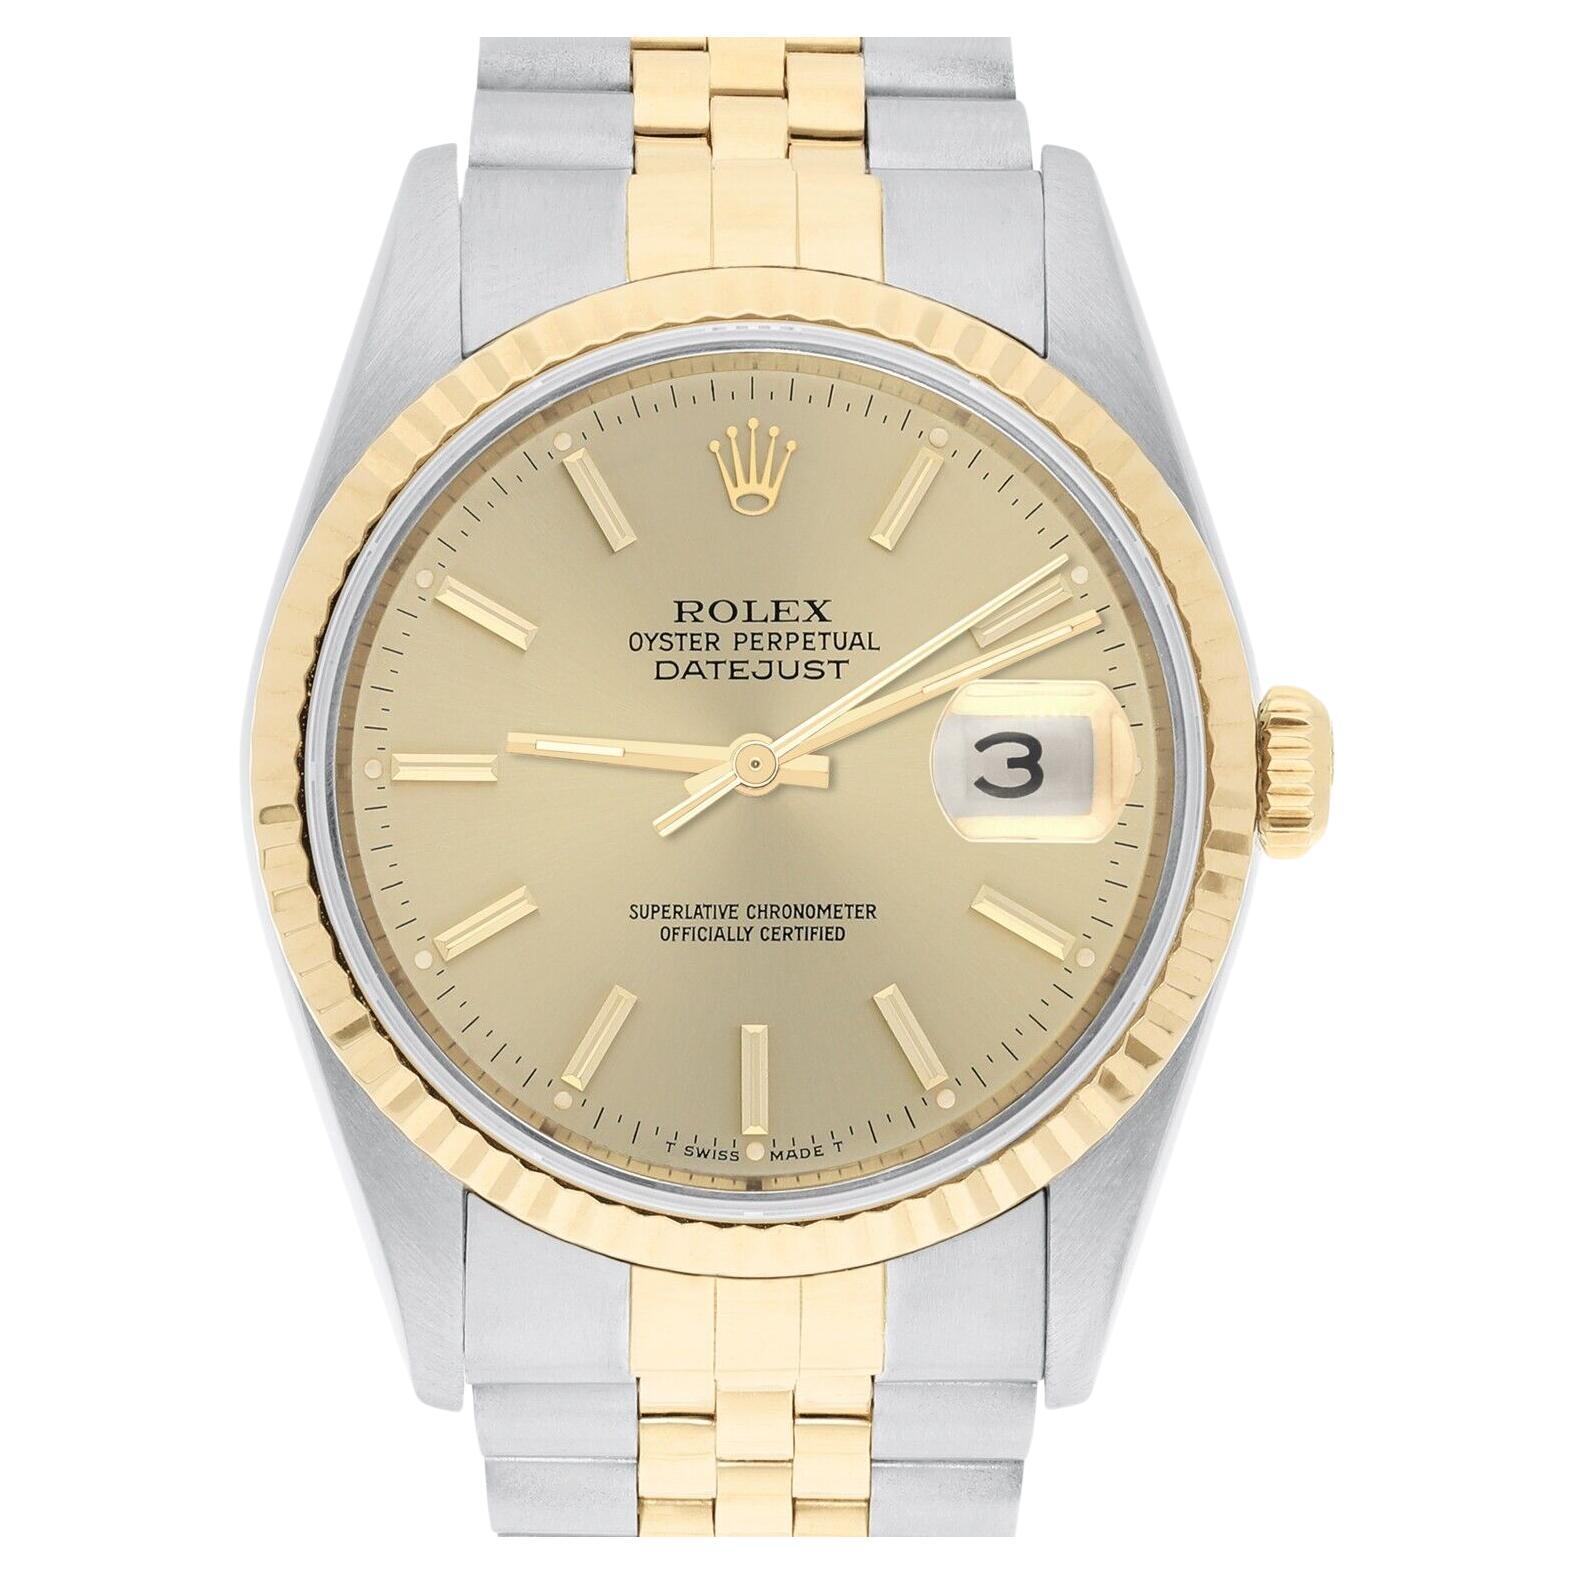 Rolex Datejust 36mm Two Tone Champagne Index Dial Jubilee 16233 Circa 2001 B/P For Sale